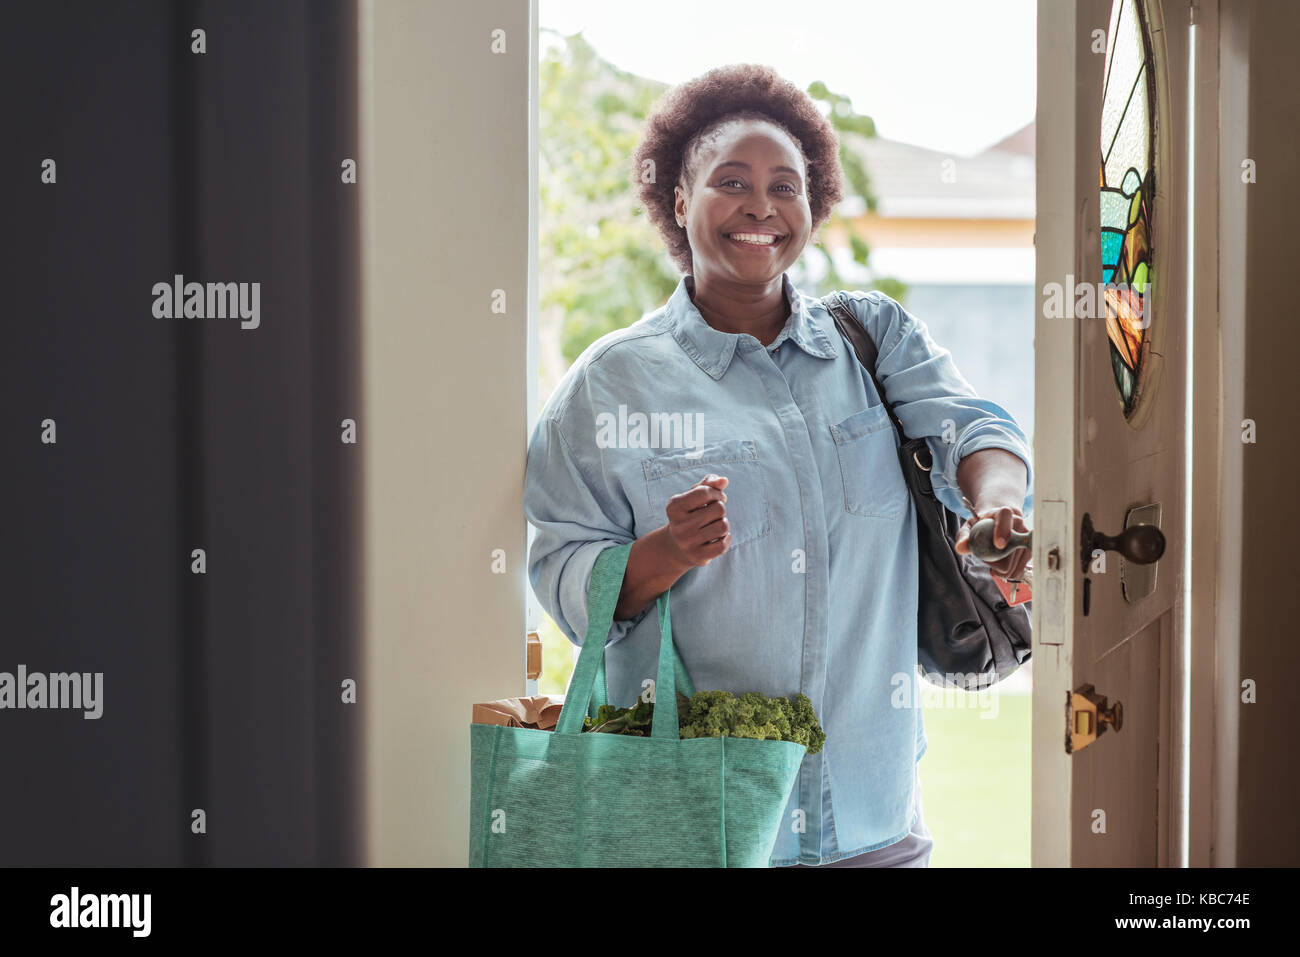 Smiling African woman arriving home from grocery shopping Stock Photo